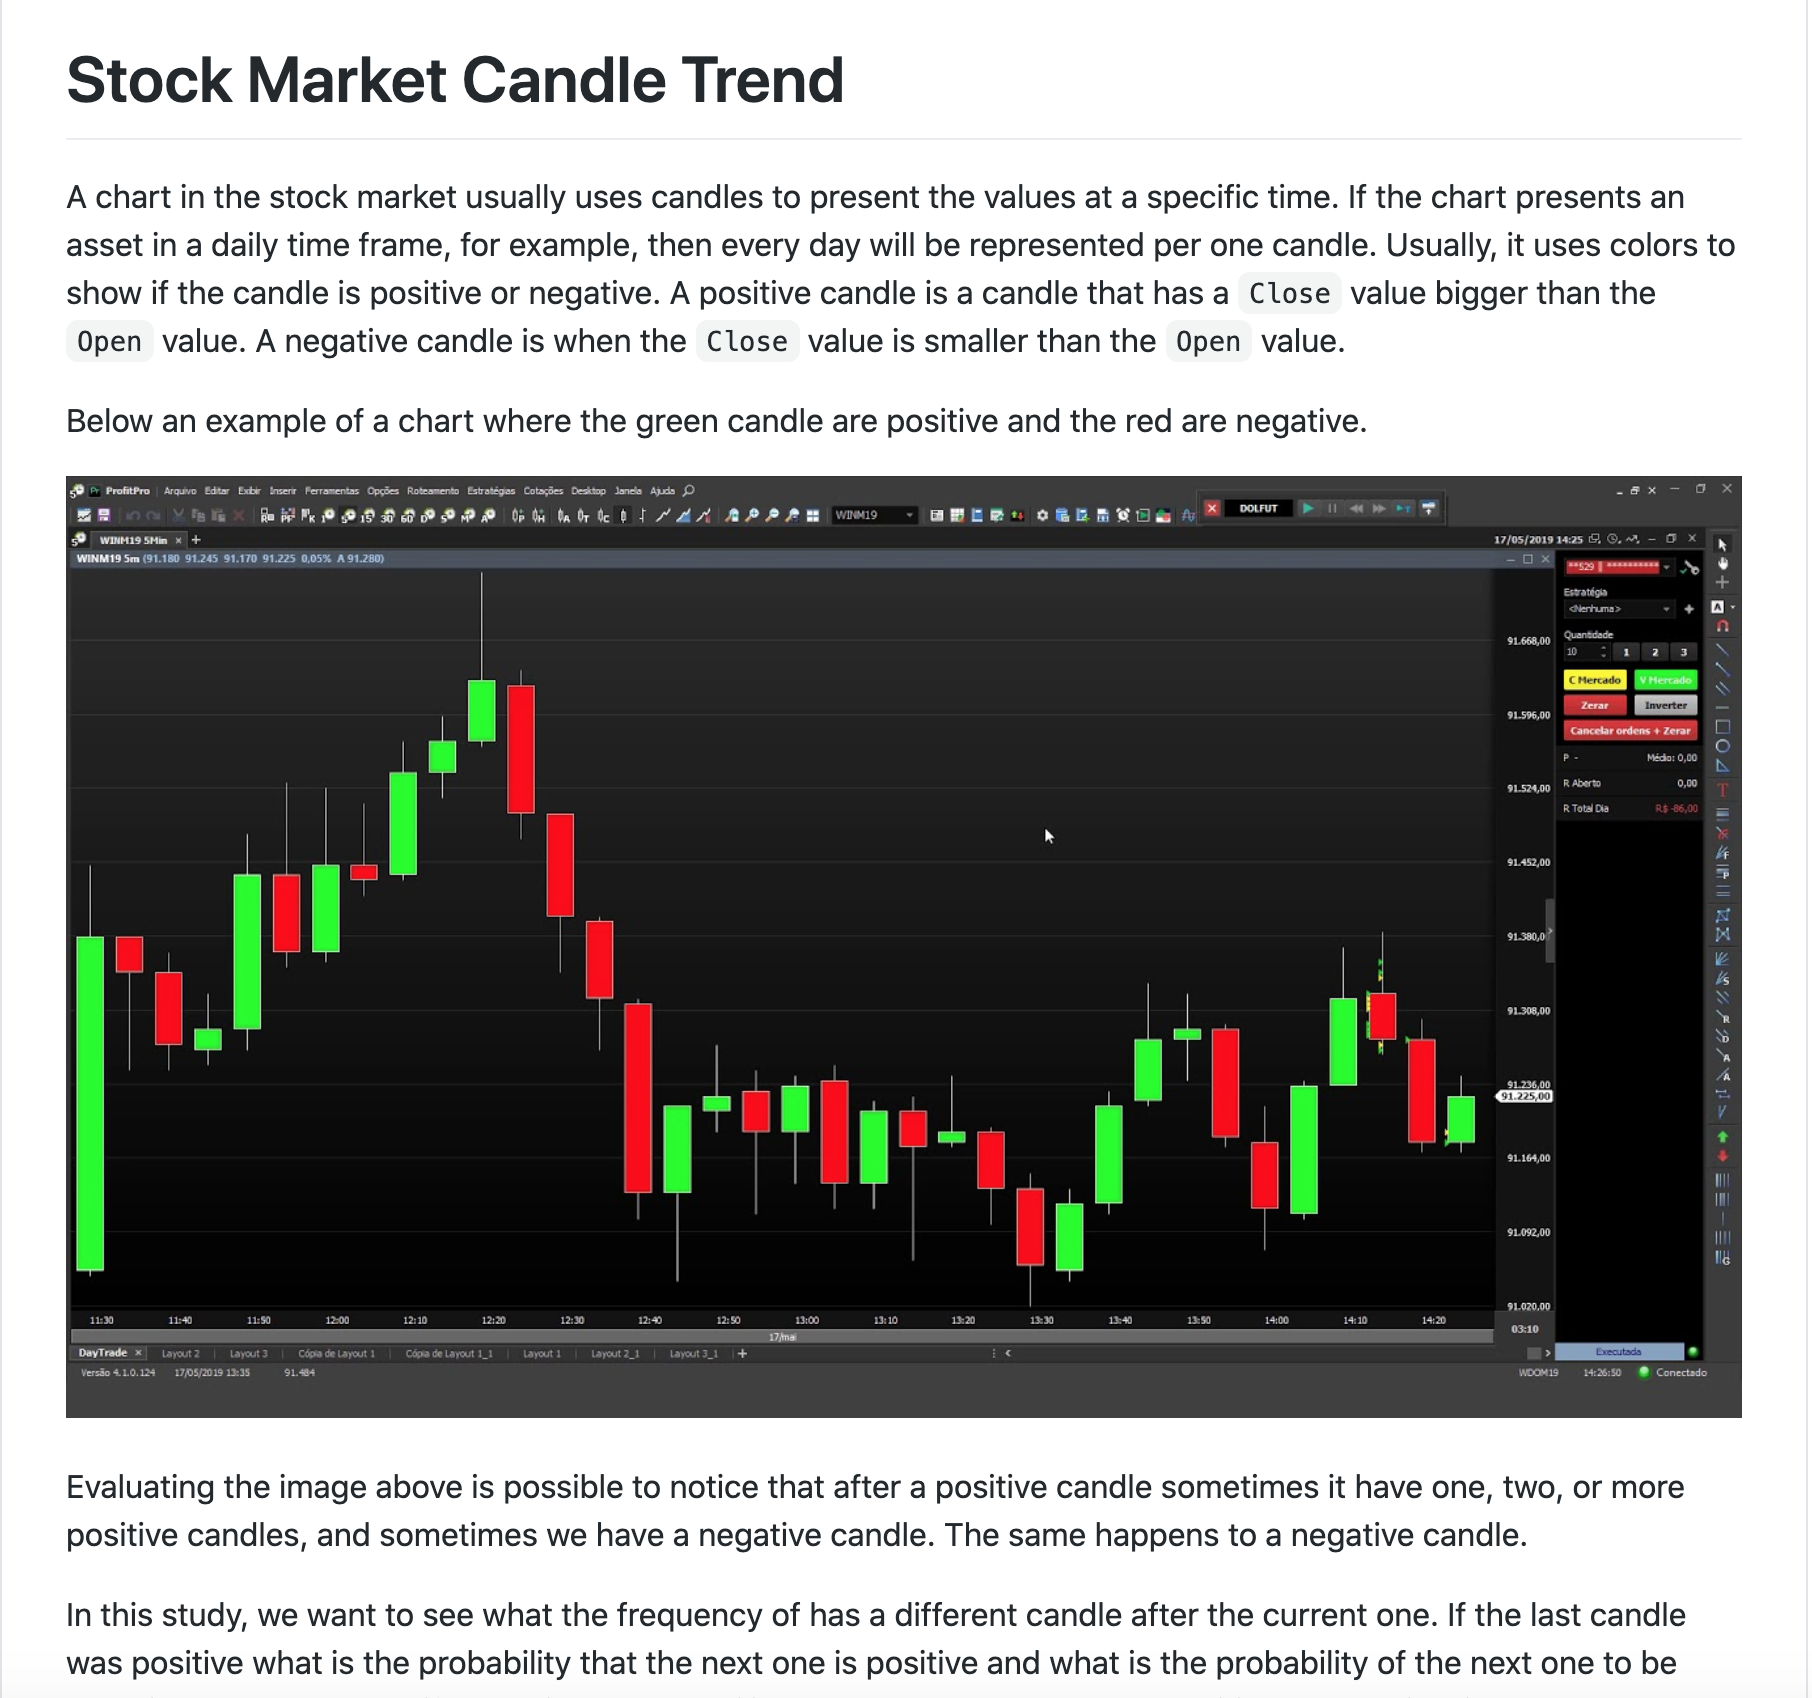 Stock market candles